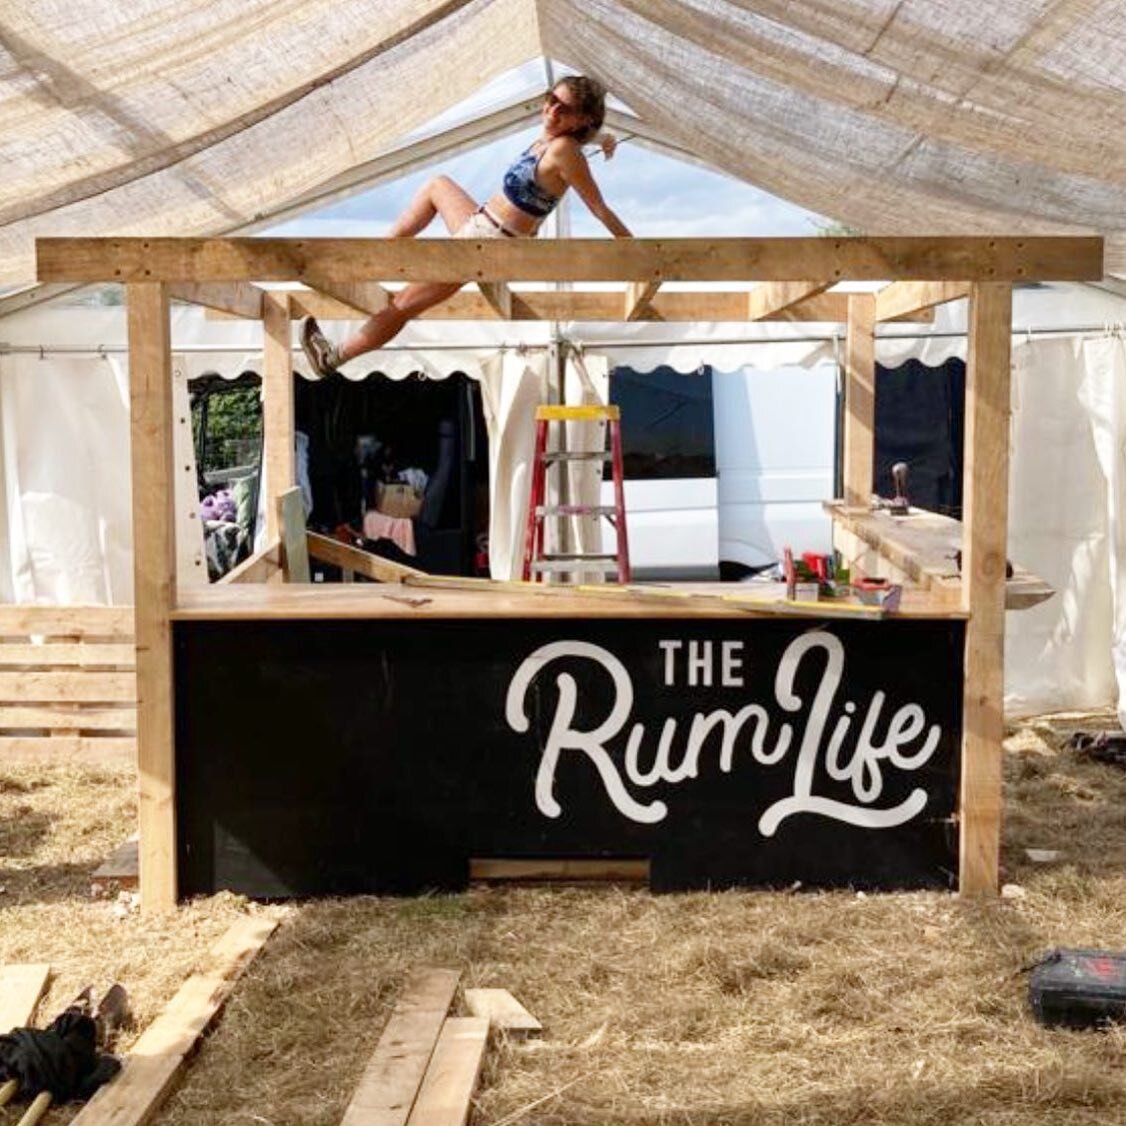 Fun times are coming to Pop Up On The Hill this summer with @therumlife 🍔🍻☀️